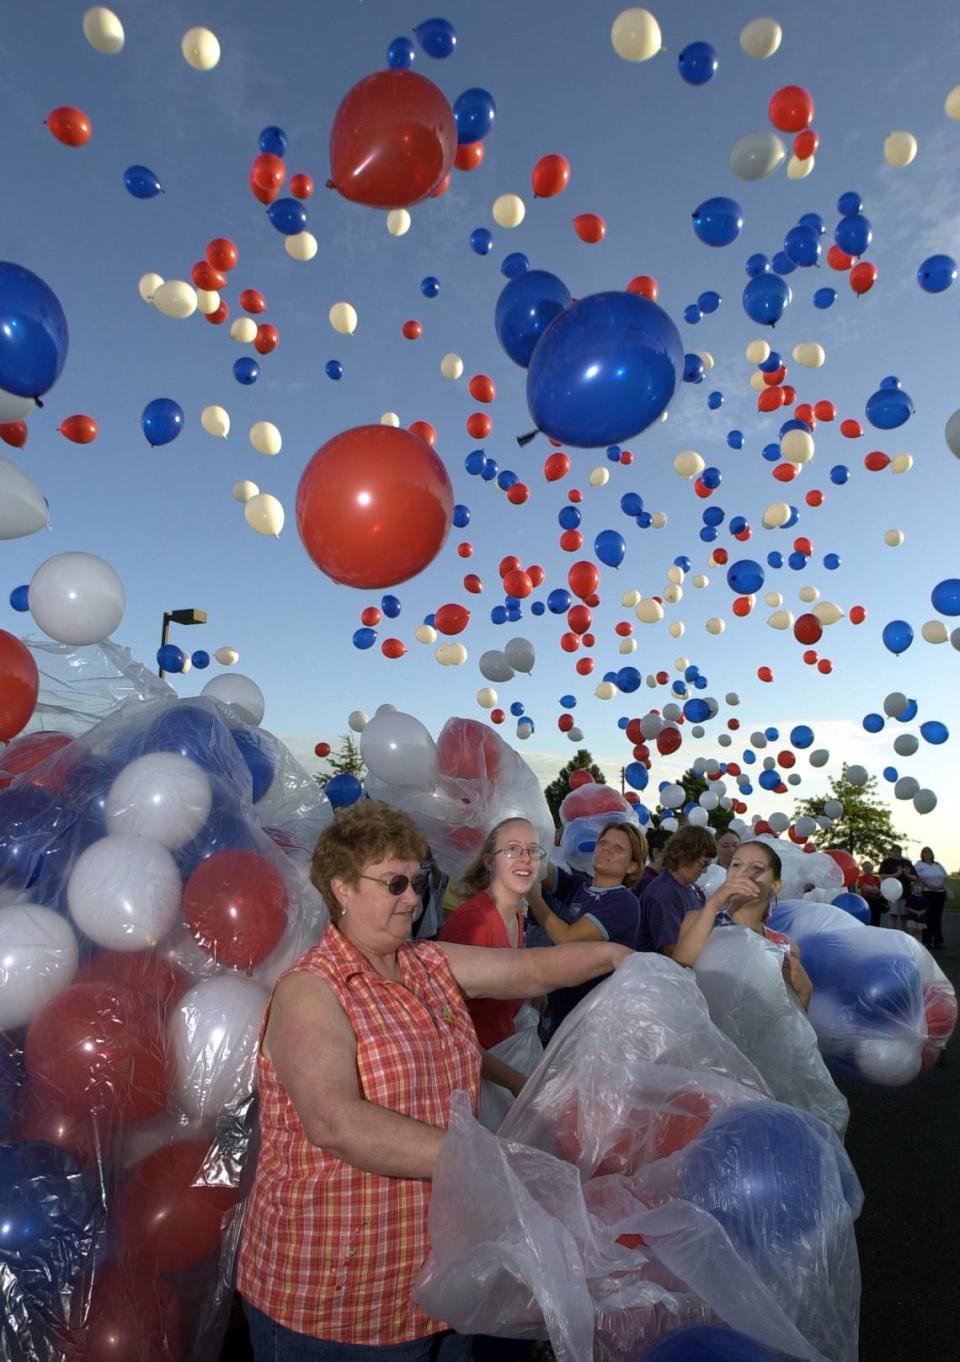 In 2002, Pioneer Balloon released 3,000 balloons as part of a Sept. 11 remembrance.